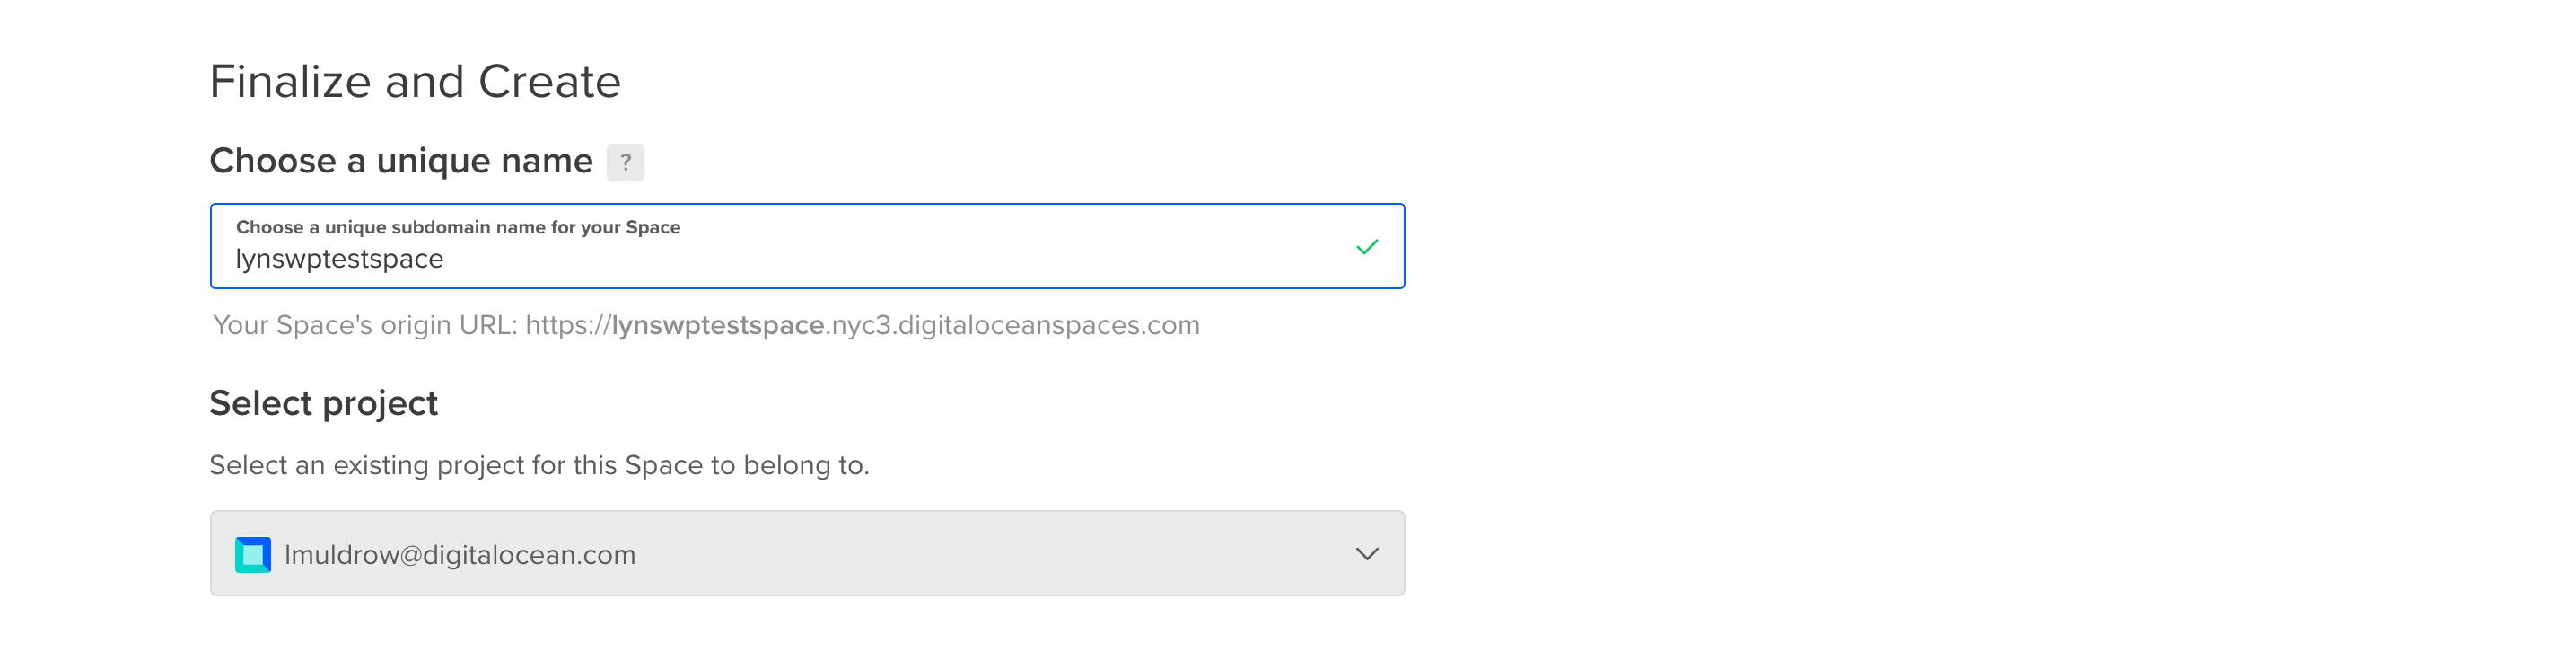 Spaces finalize and create selection